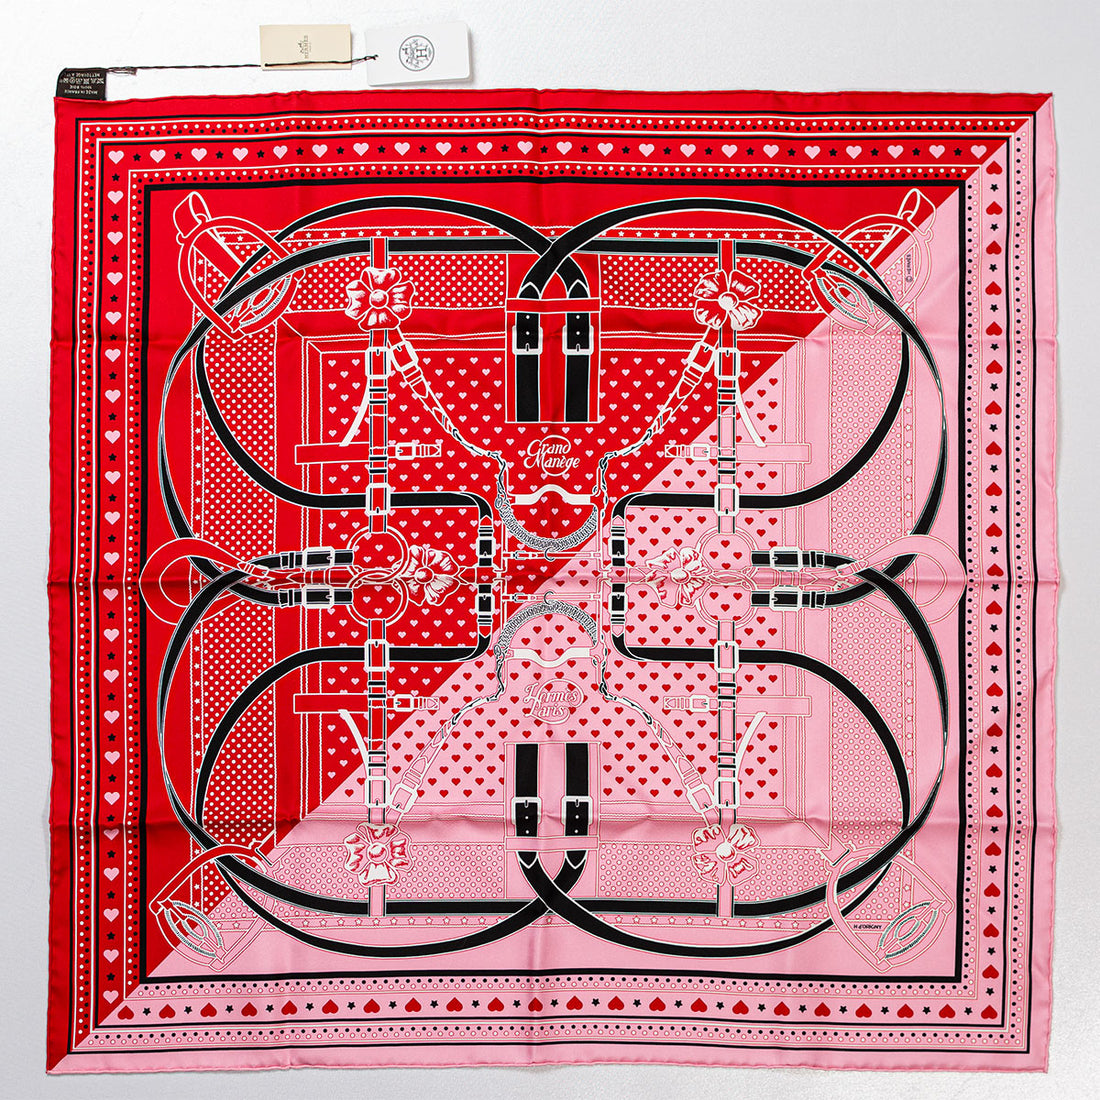 Hermès &quot;Grand Manege&quot; Scarf 70 with Heart Box